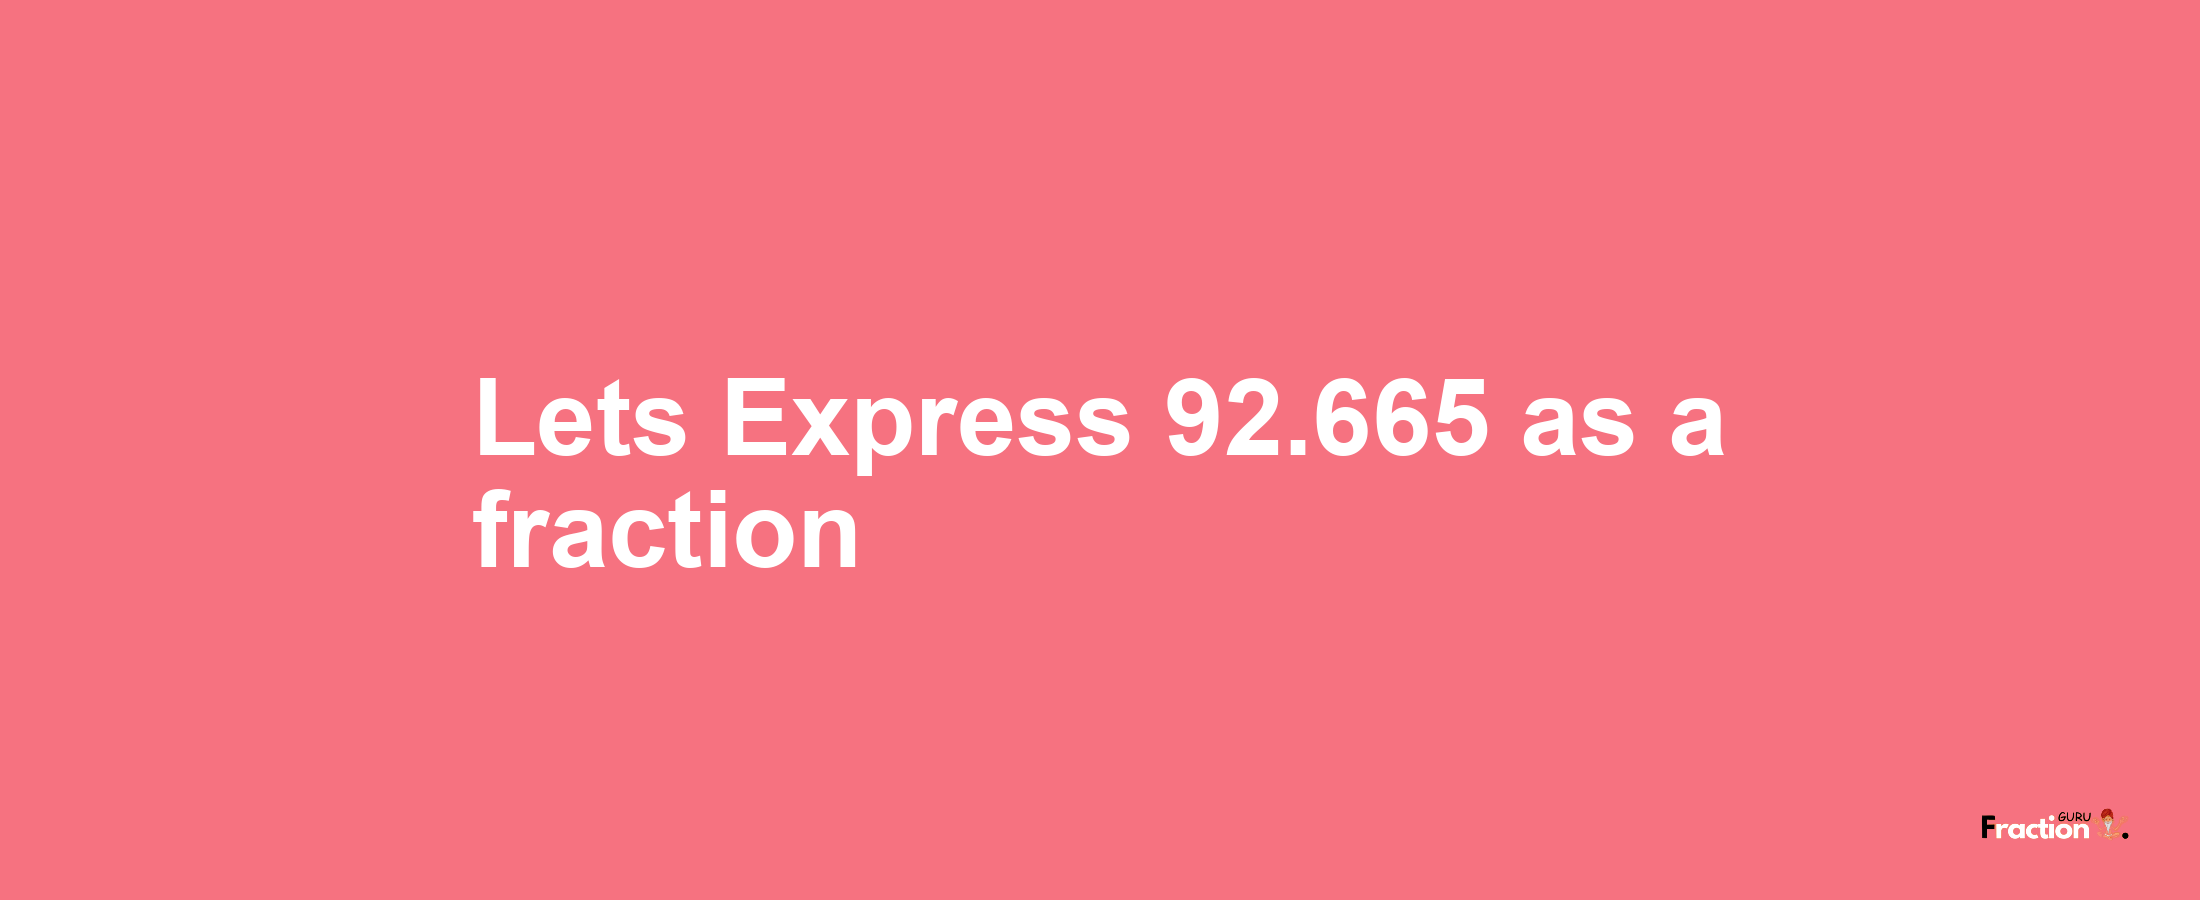 Lets Express 92.665 as afraction